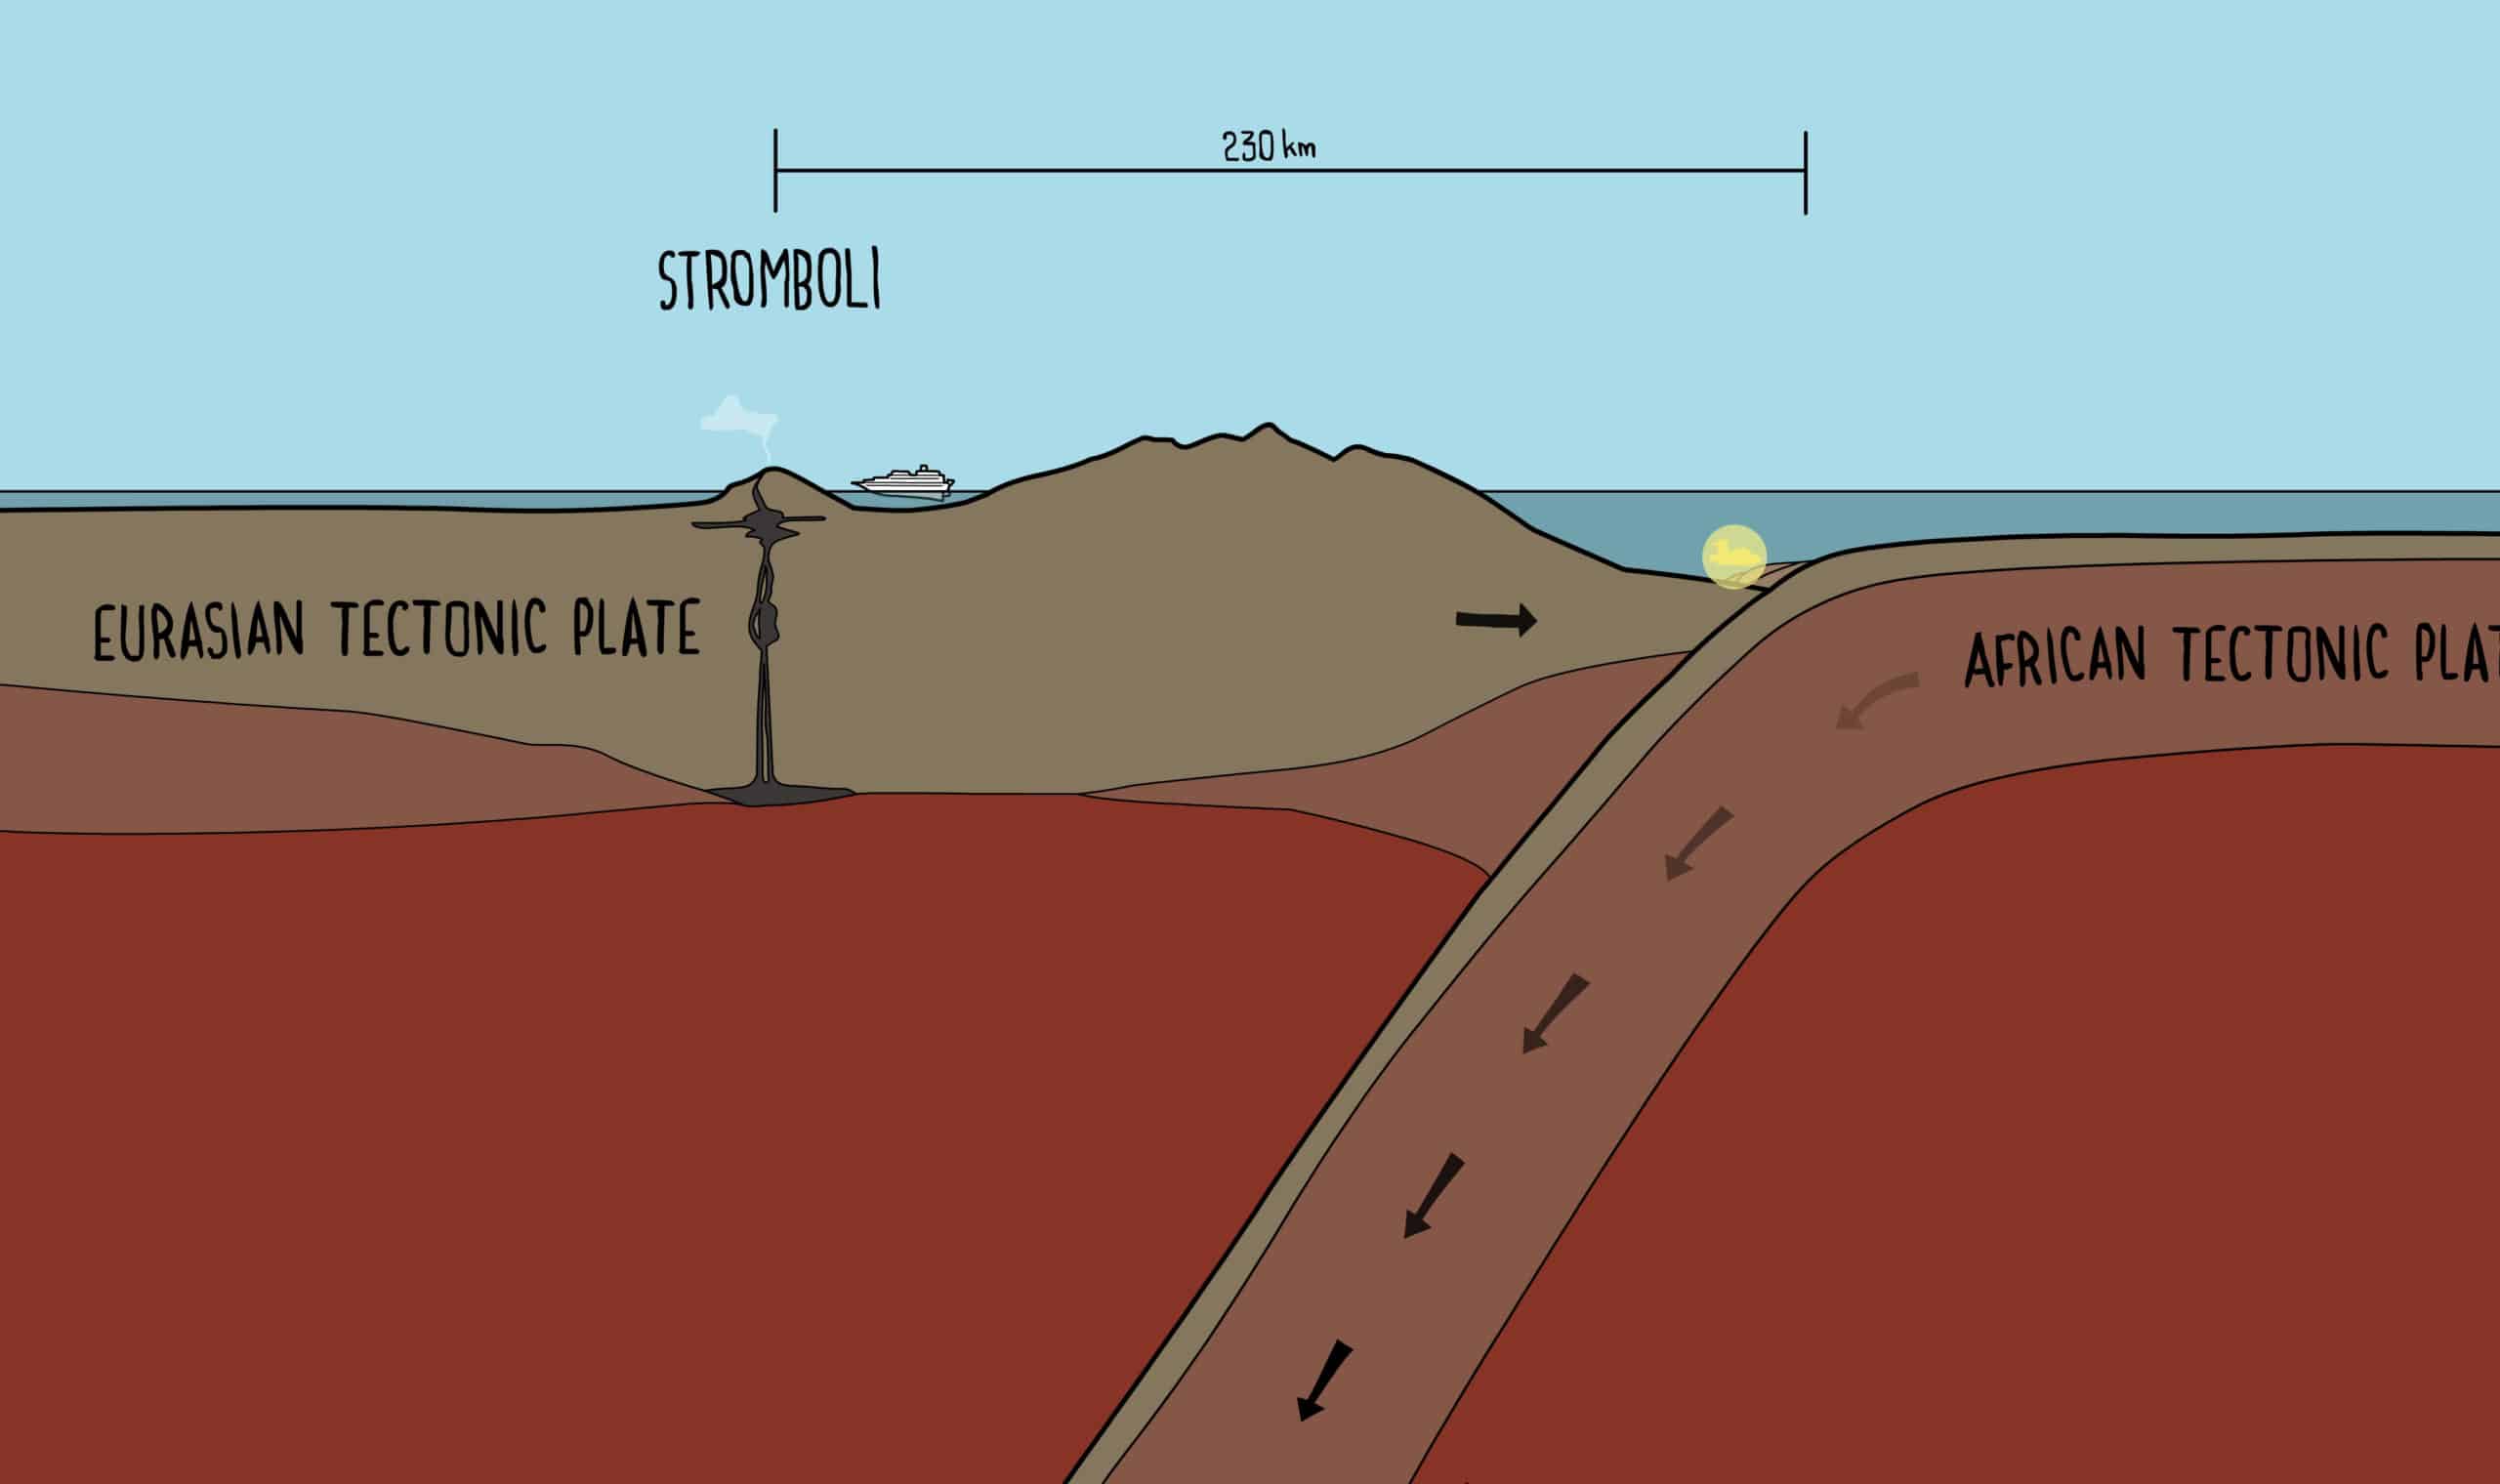 Cartoon of a subduction zone. Still image from the animation 'Underwater Volcano Disaster'.